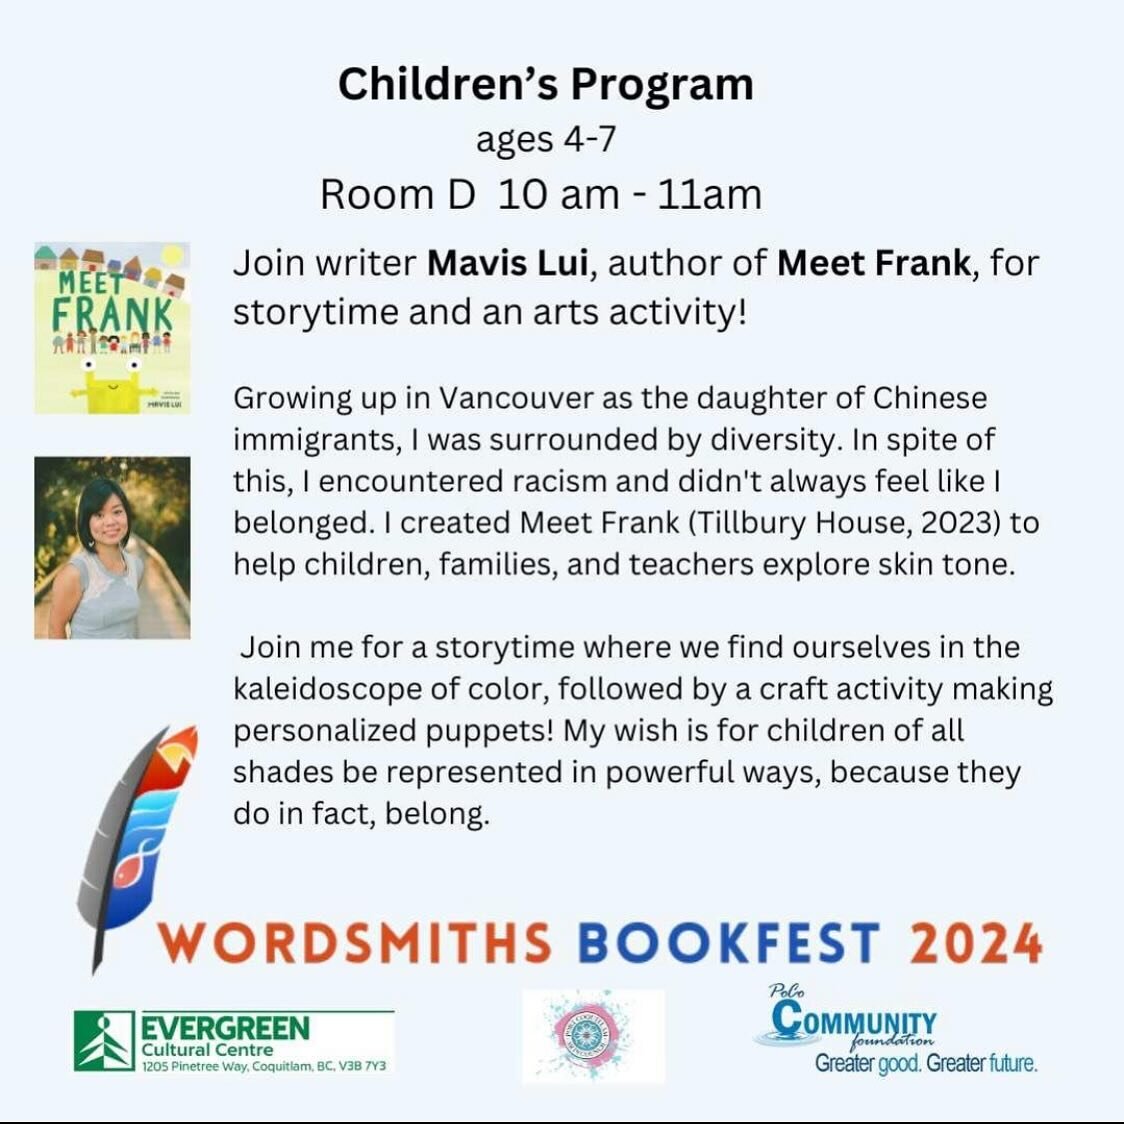 Join me and Frank on Saturday, March 23rd at the Evergreen Cultural Centre in Coquitlam! Many thanks to @tri.city.wordsmiths 🤍

@tilburyhousepublishers
#teachingdiversity #kidsbooksaboutidentity #kidsbooksaboutdiversity #diversepicturebooks #diverse